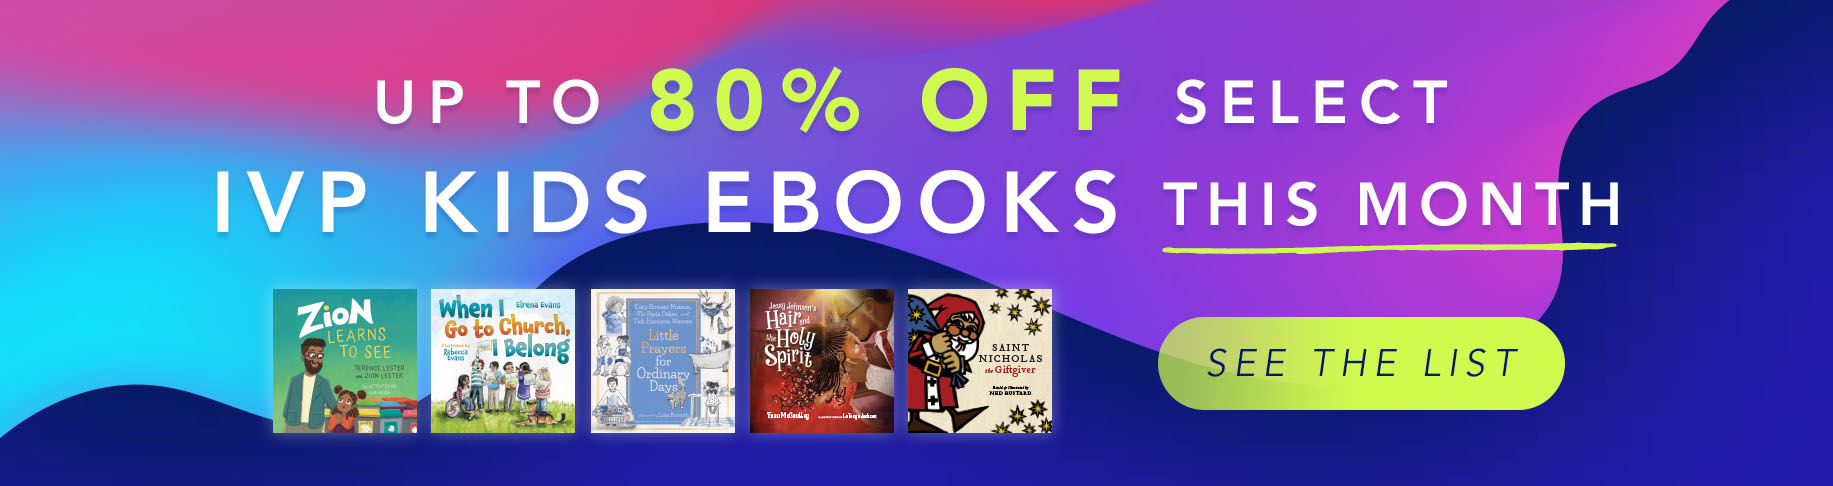 Up to 80% Off Select IVP Kids Ebooks the Month - See the List